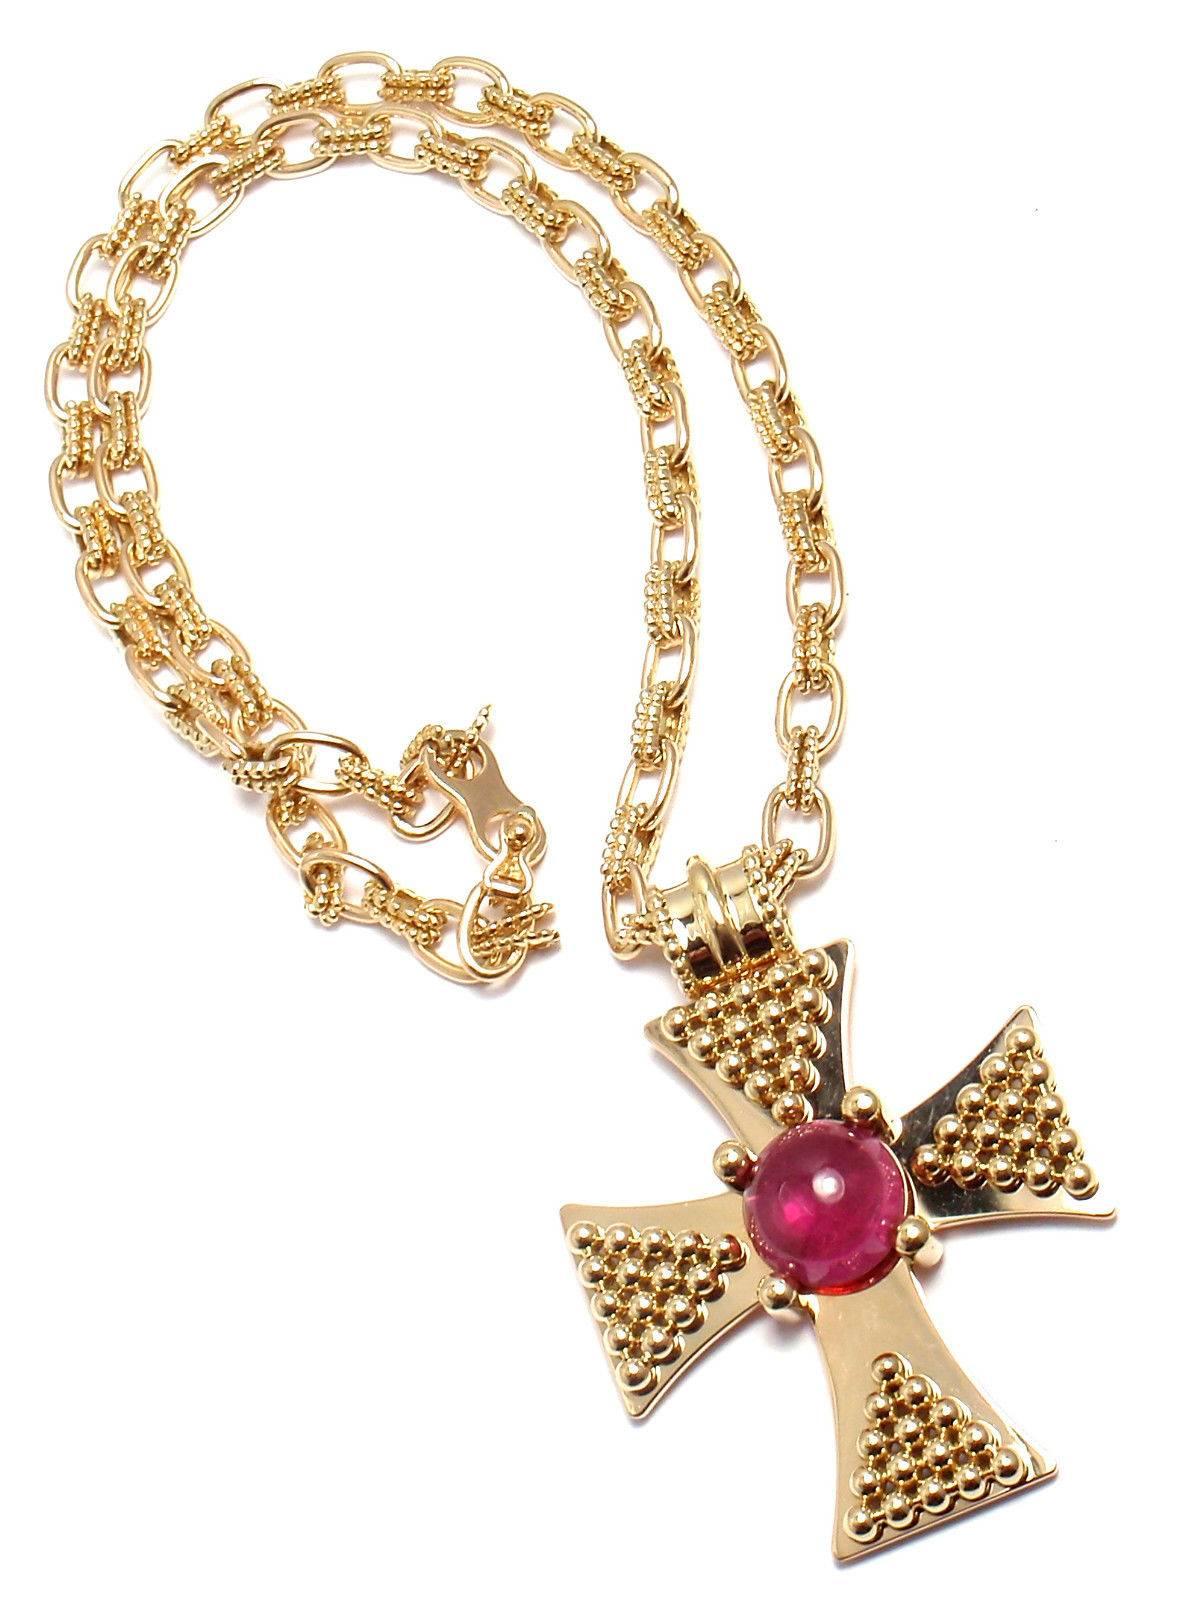 18k Yellow Gold Pink Tourmaline Maltese Cross Pendant Necklace by Chanel. 
With 1 round cabochon pink tourmaline 13mm

Details: 
Length: 18